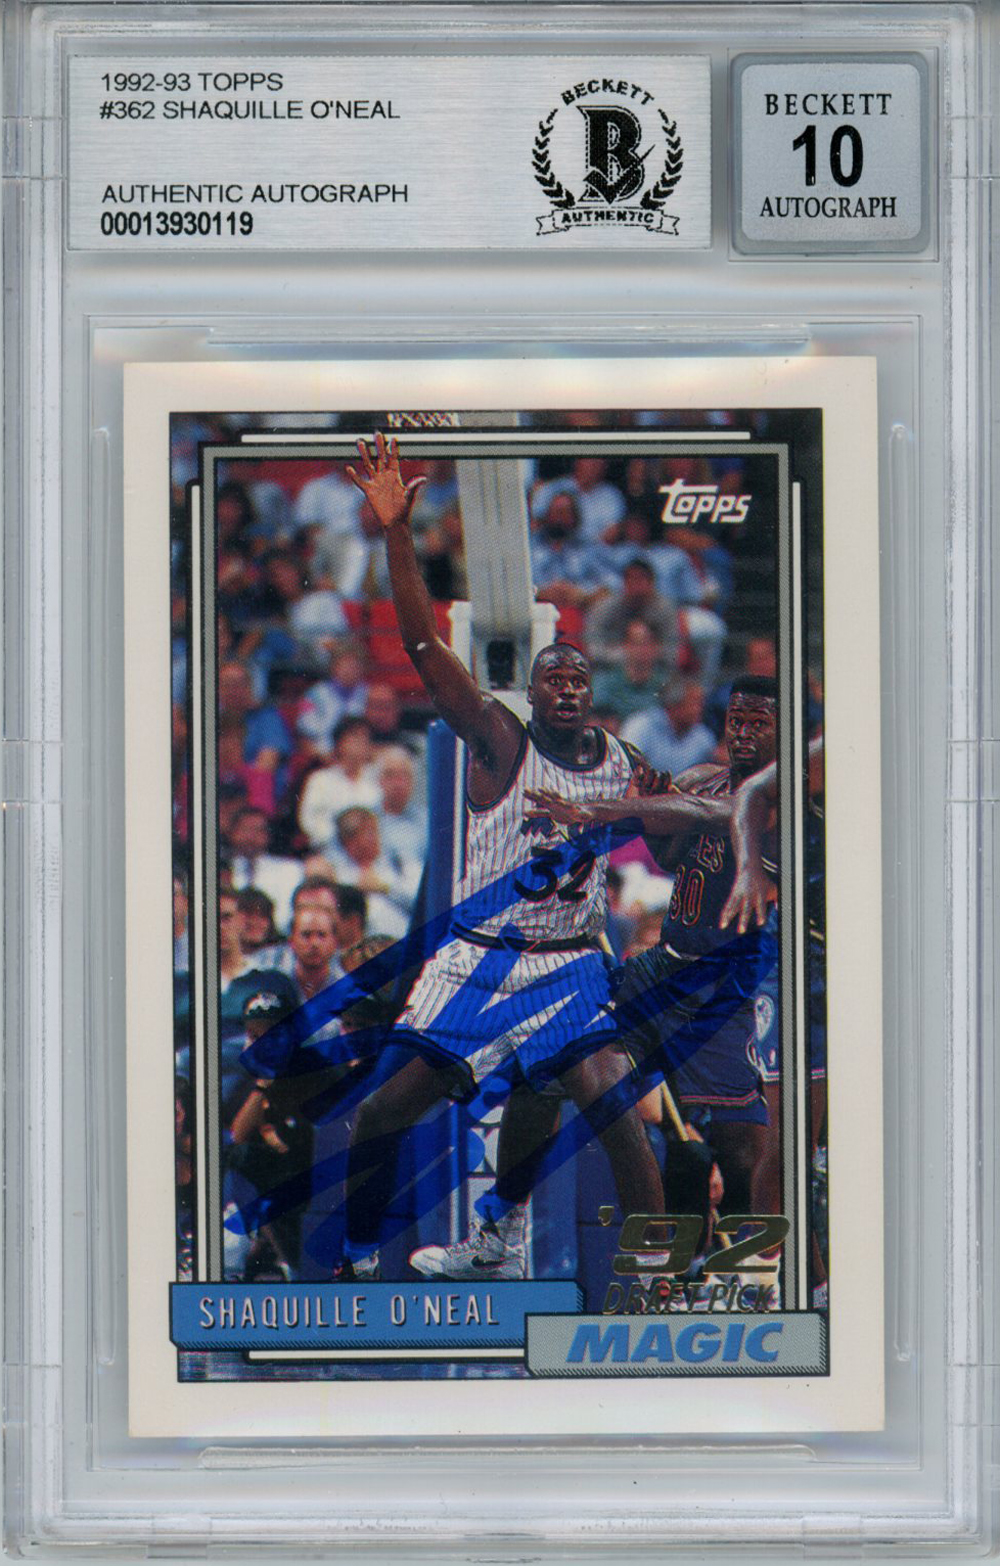 Shaquille O'Neal Autographed 1992 Topps #362 Rookie Card Beckett 10 Slab